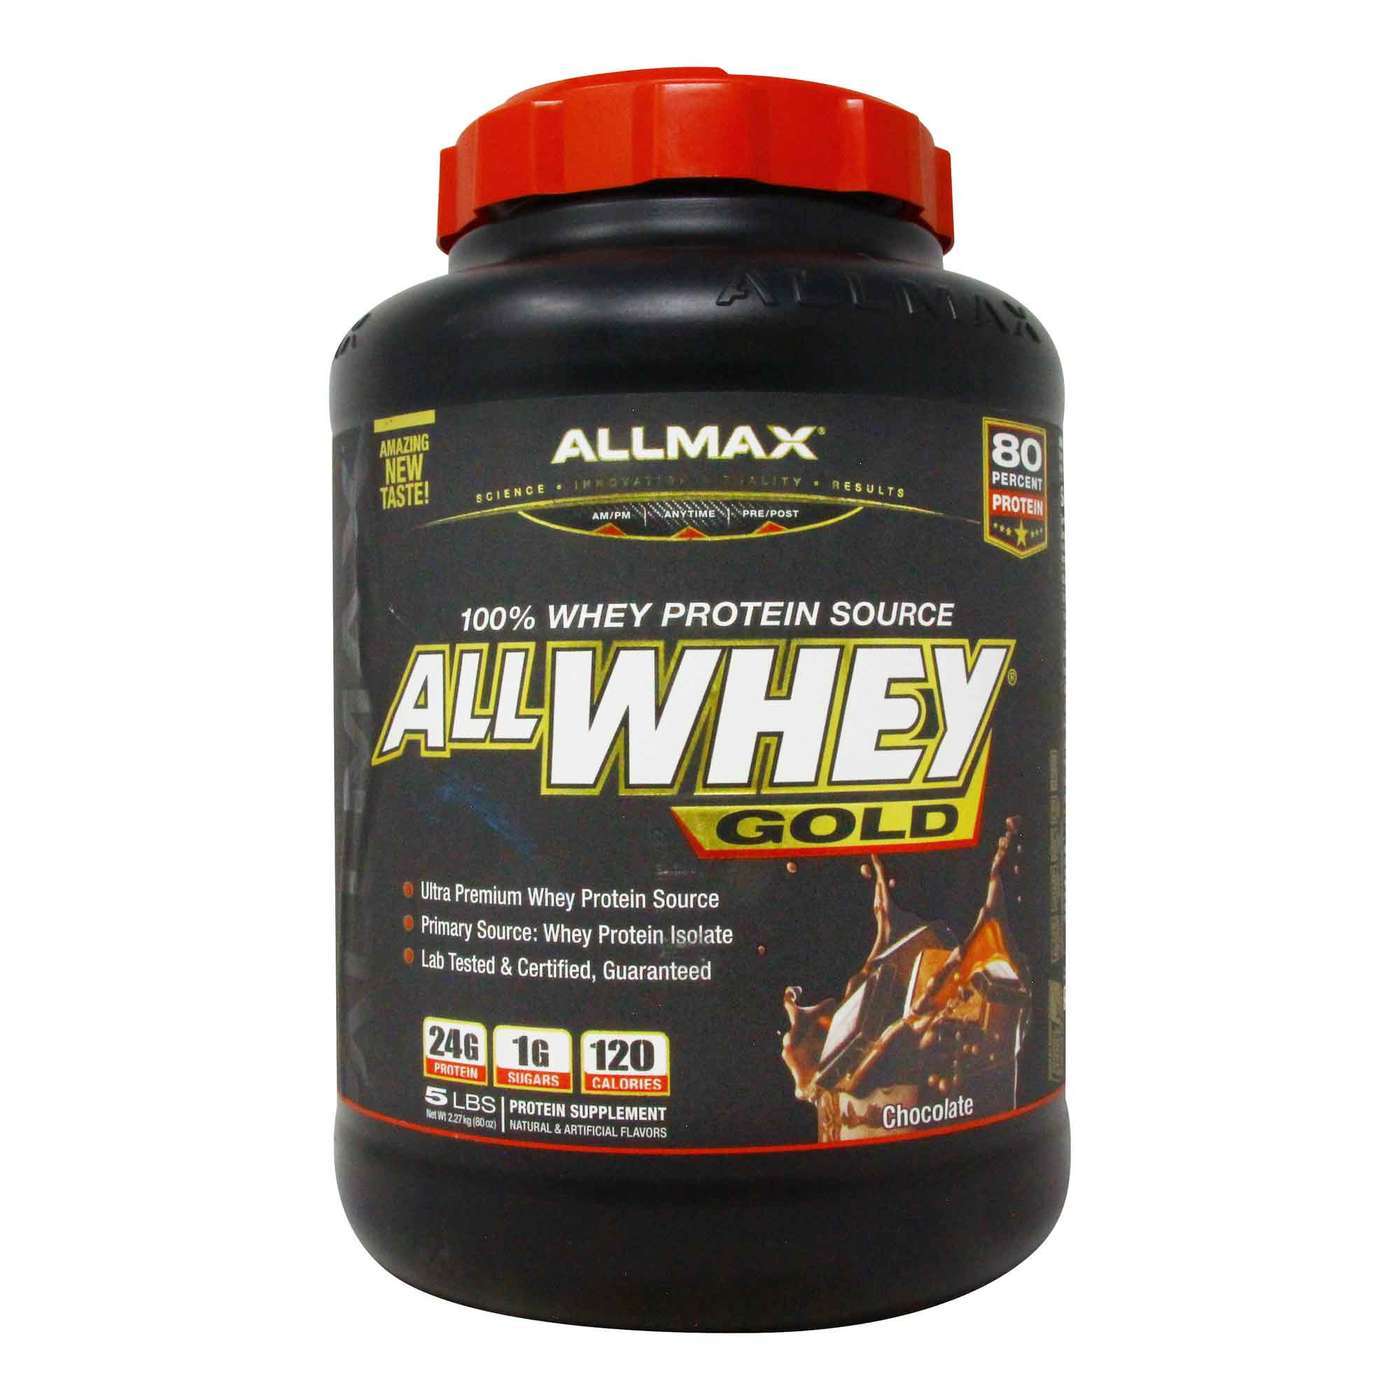 Allmax gold allwhey ring on rings stacker